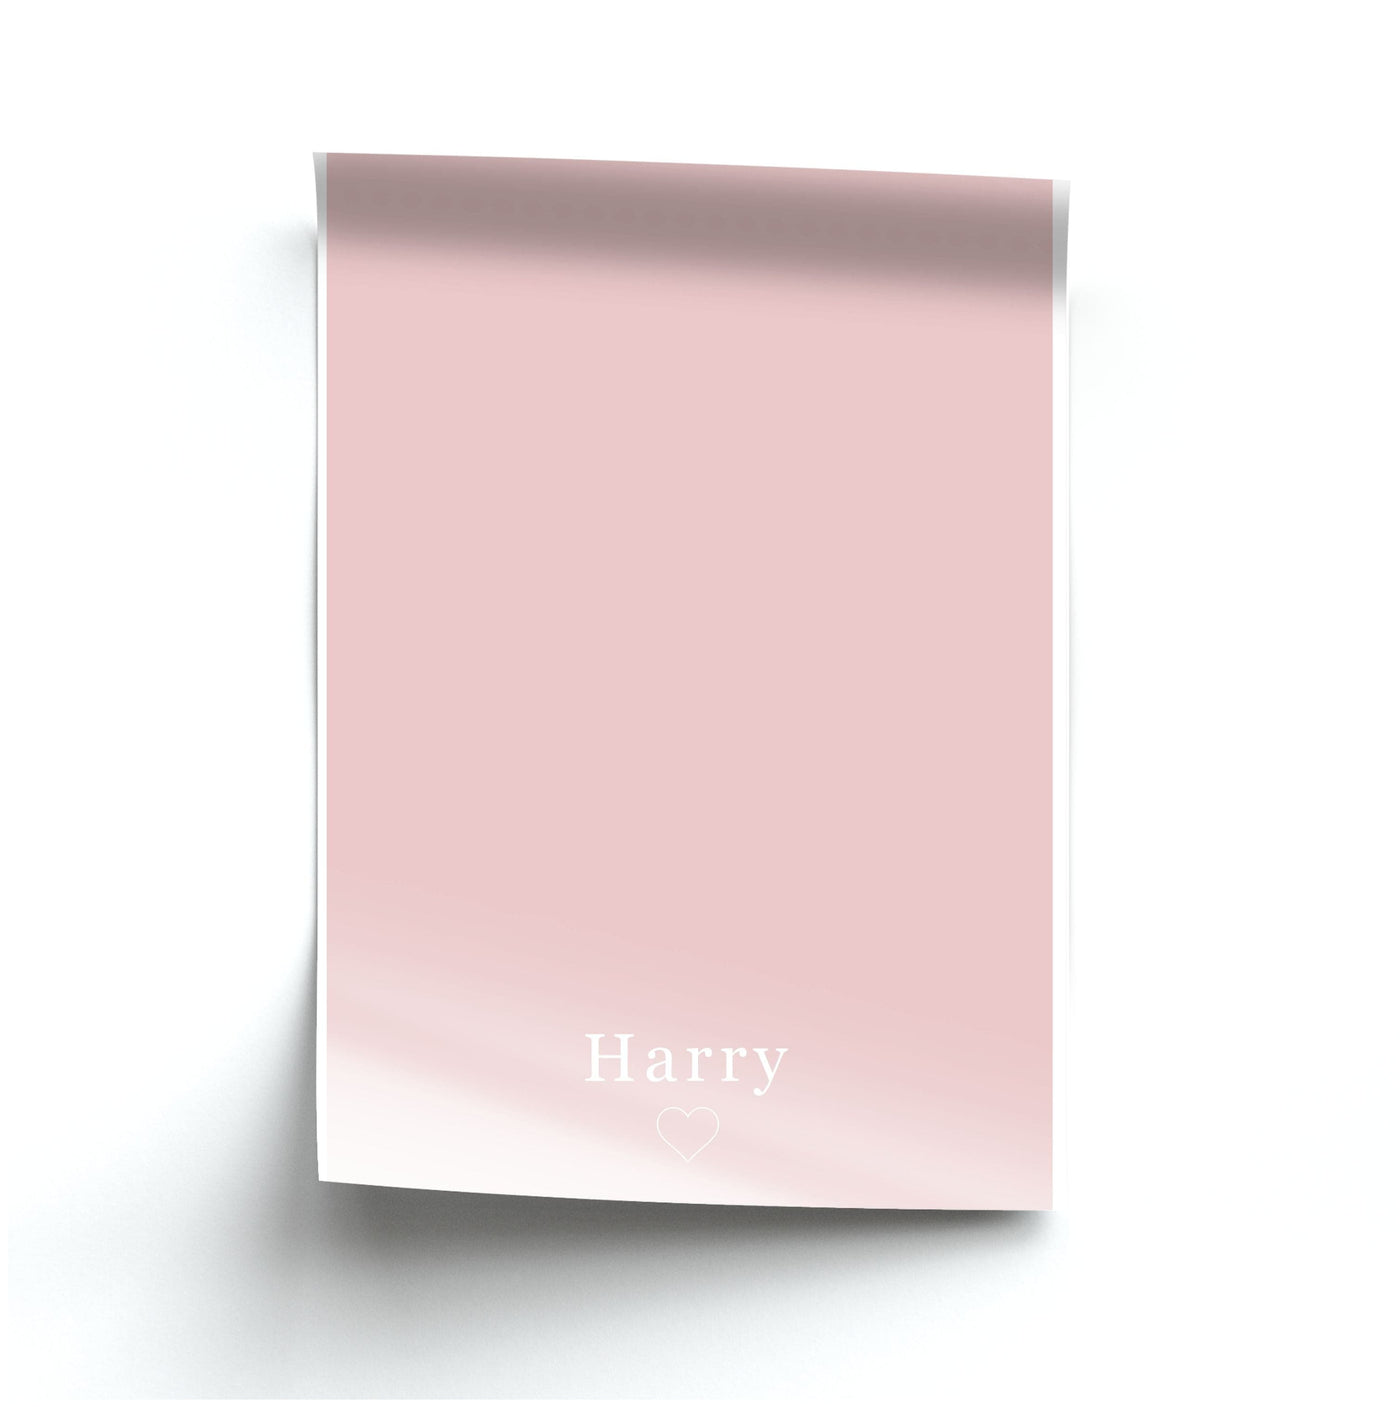 Harry - Pink Harry Poster